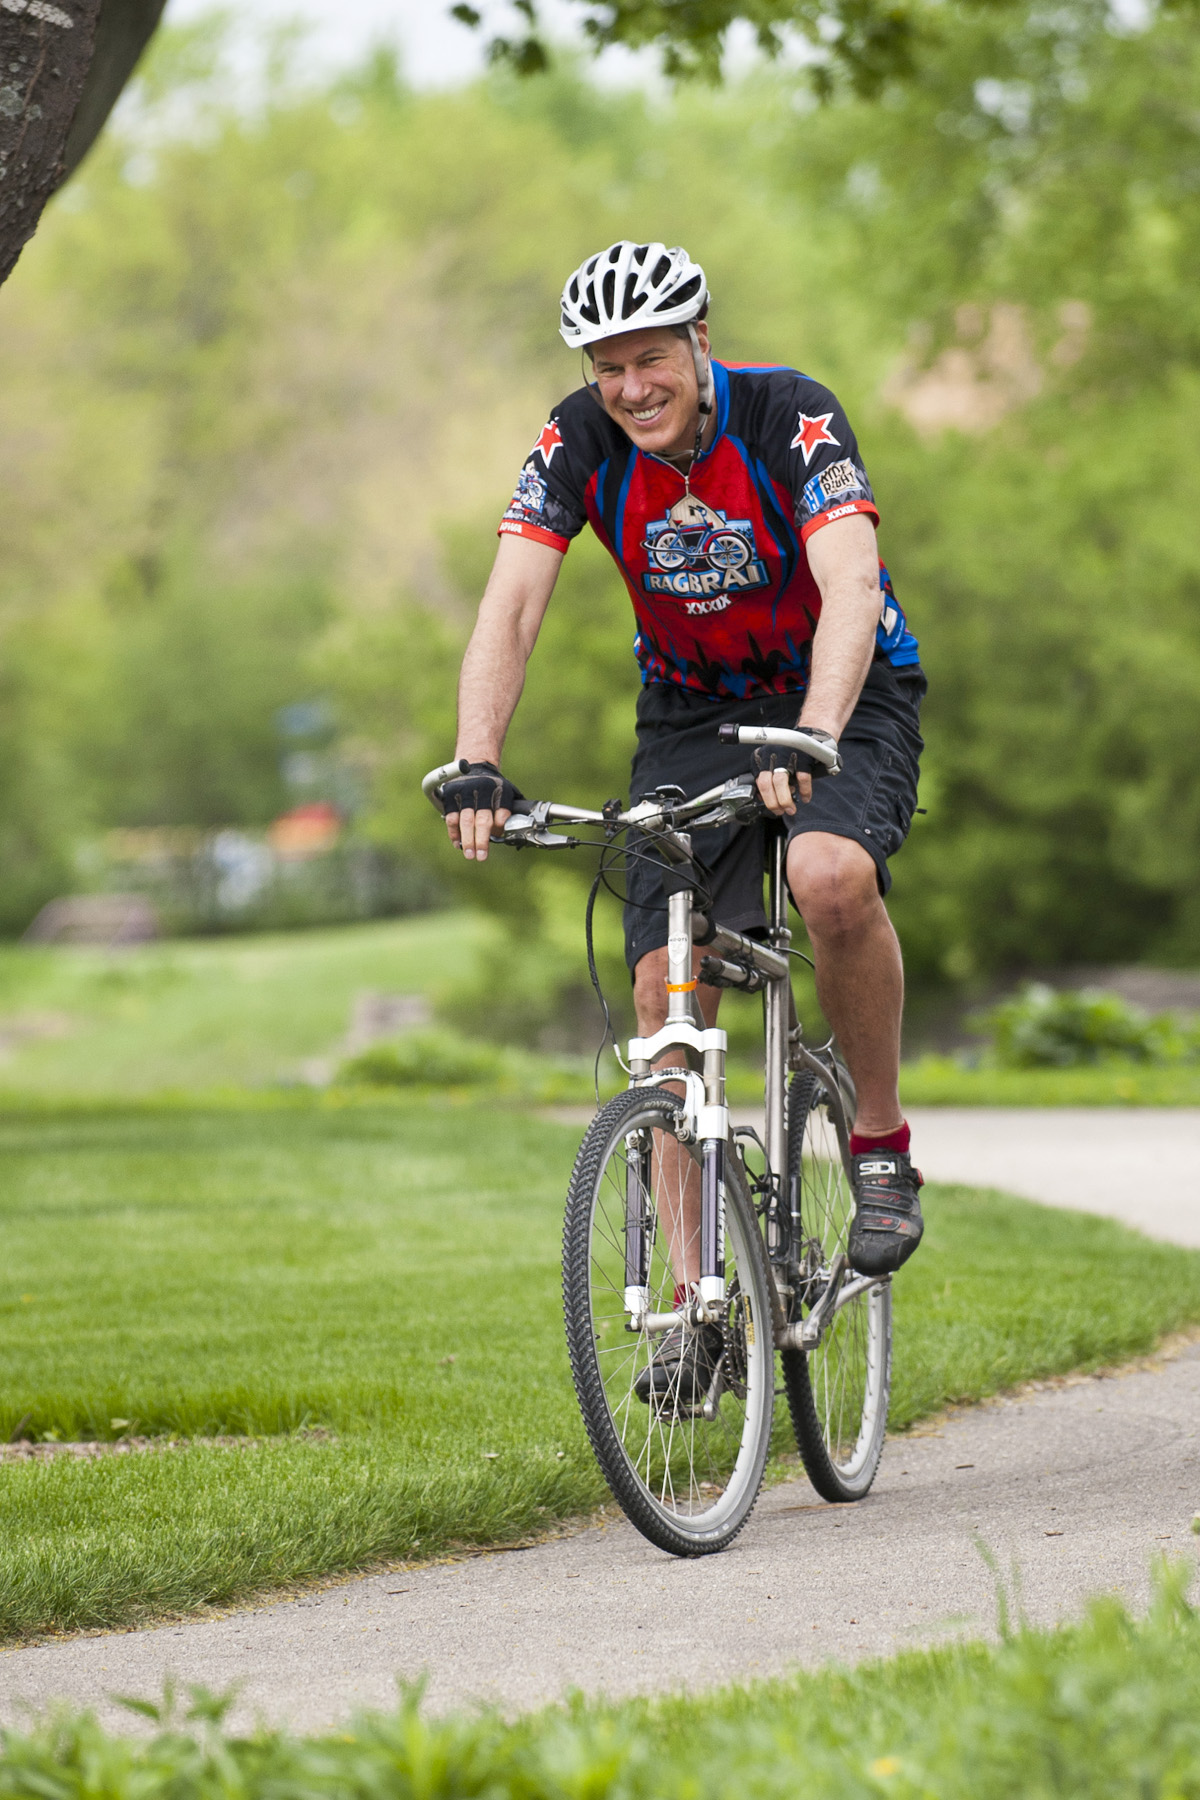 Cyclist racks up miles after double knee replacement | health enews ...